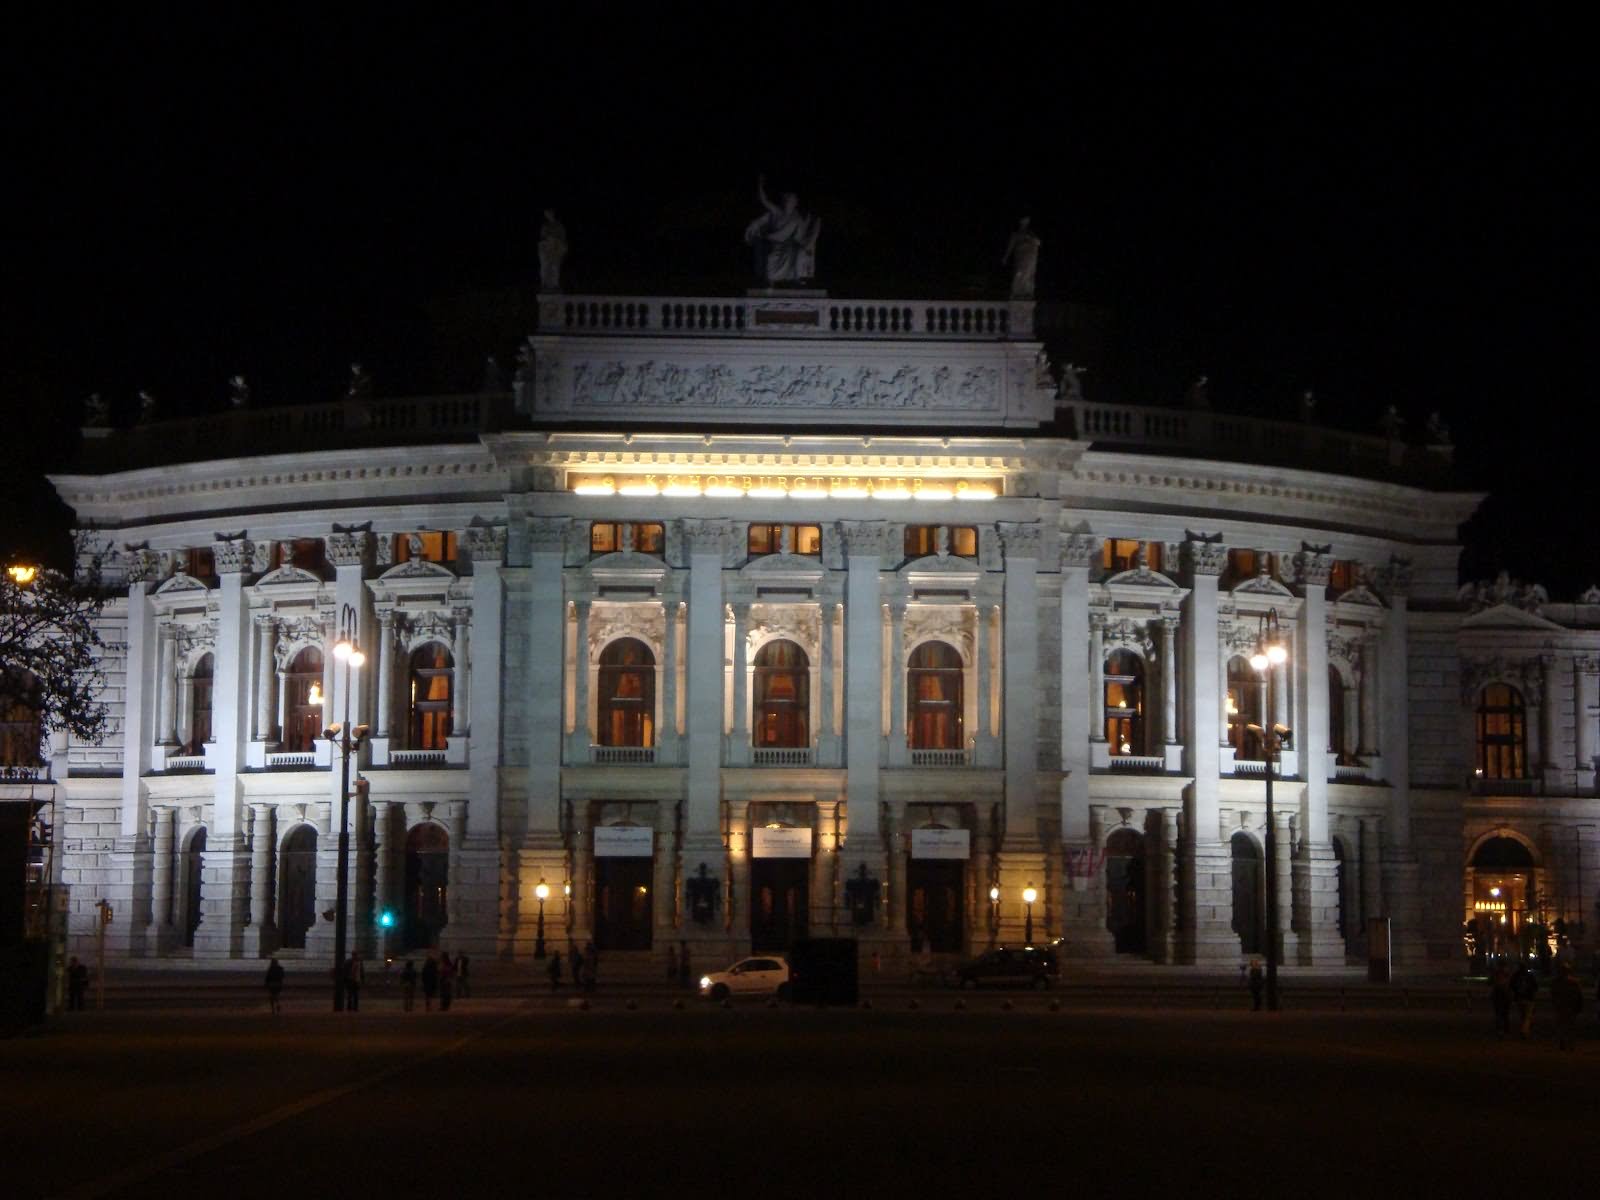 Beautiful Night Picture Of The Burgtheater In Vienna, Austria